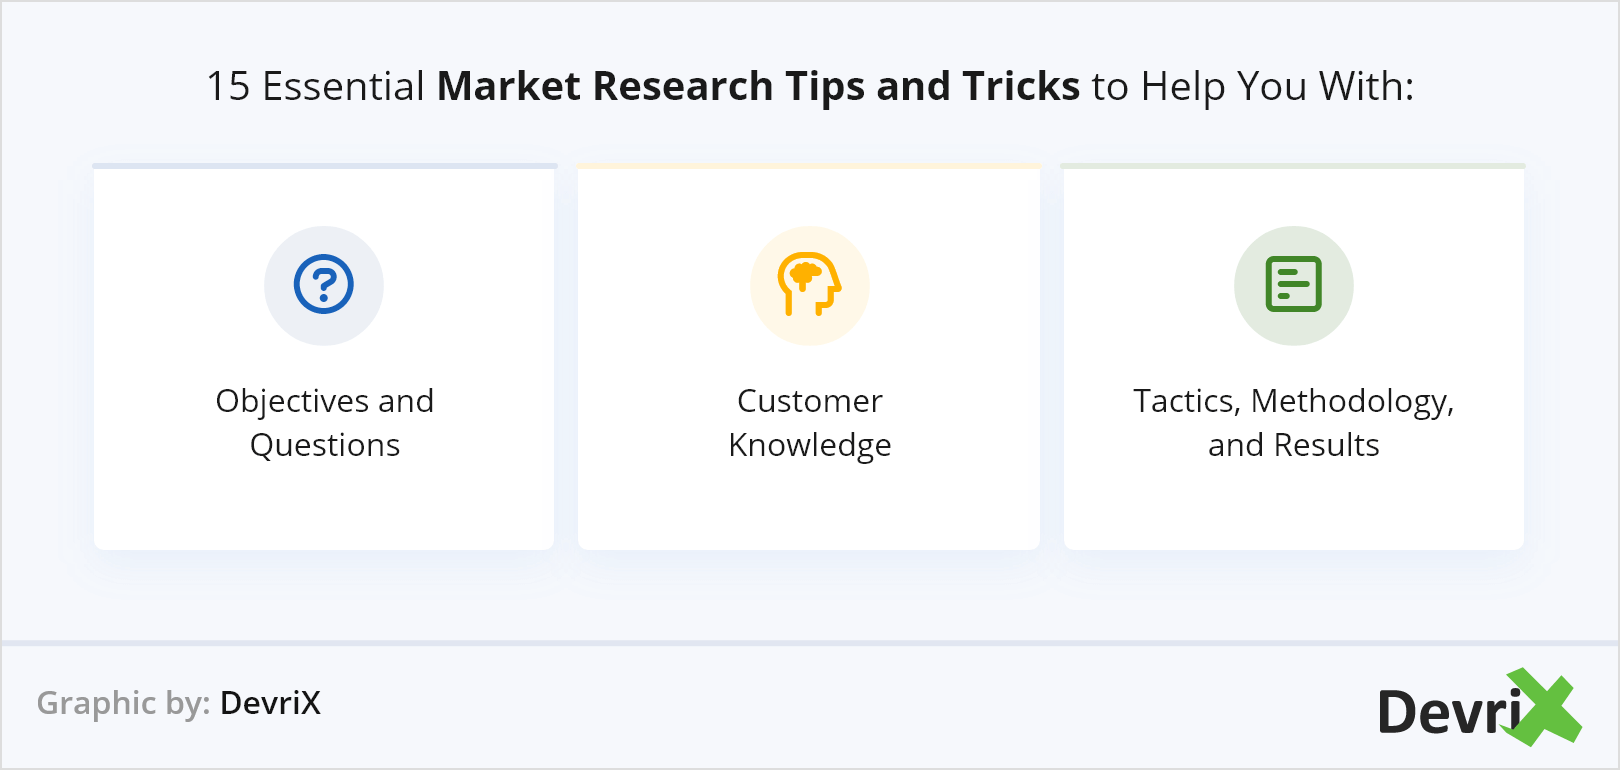 15 Essential Market Research Tips and Tricks to Help You With@2x